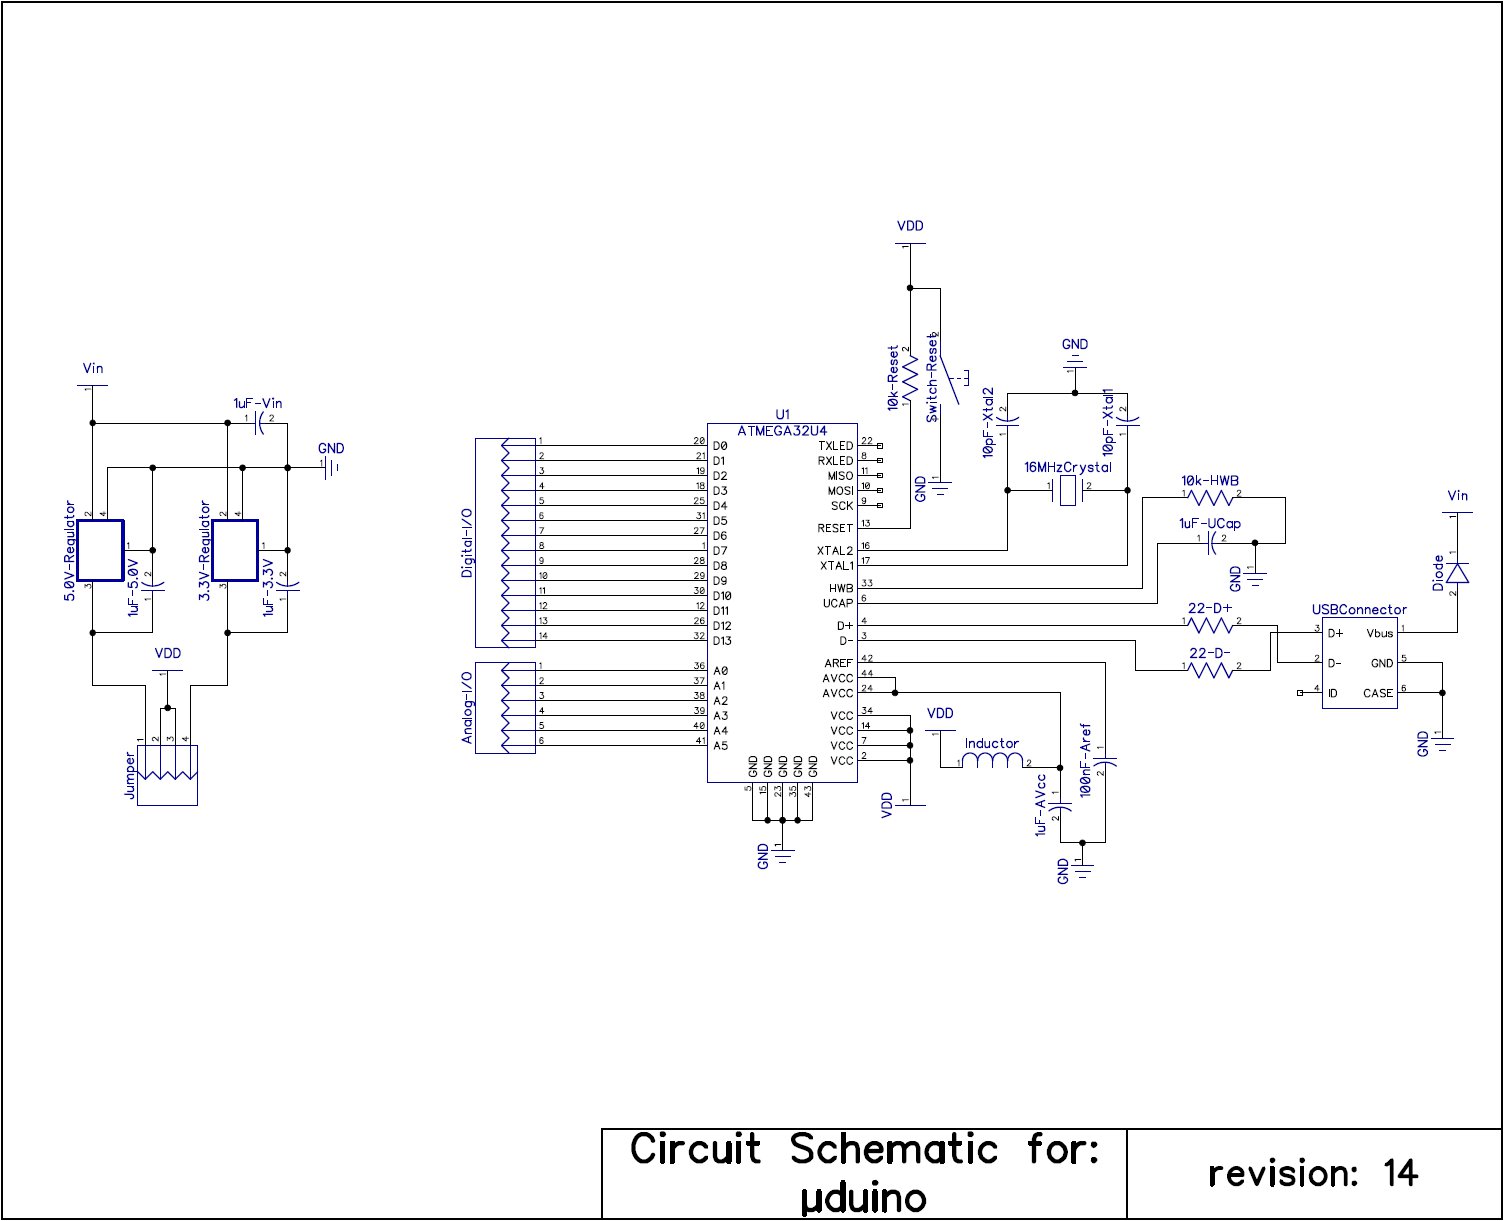 Schematic for the final µduino.